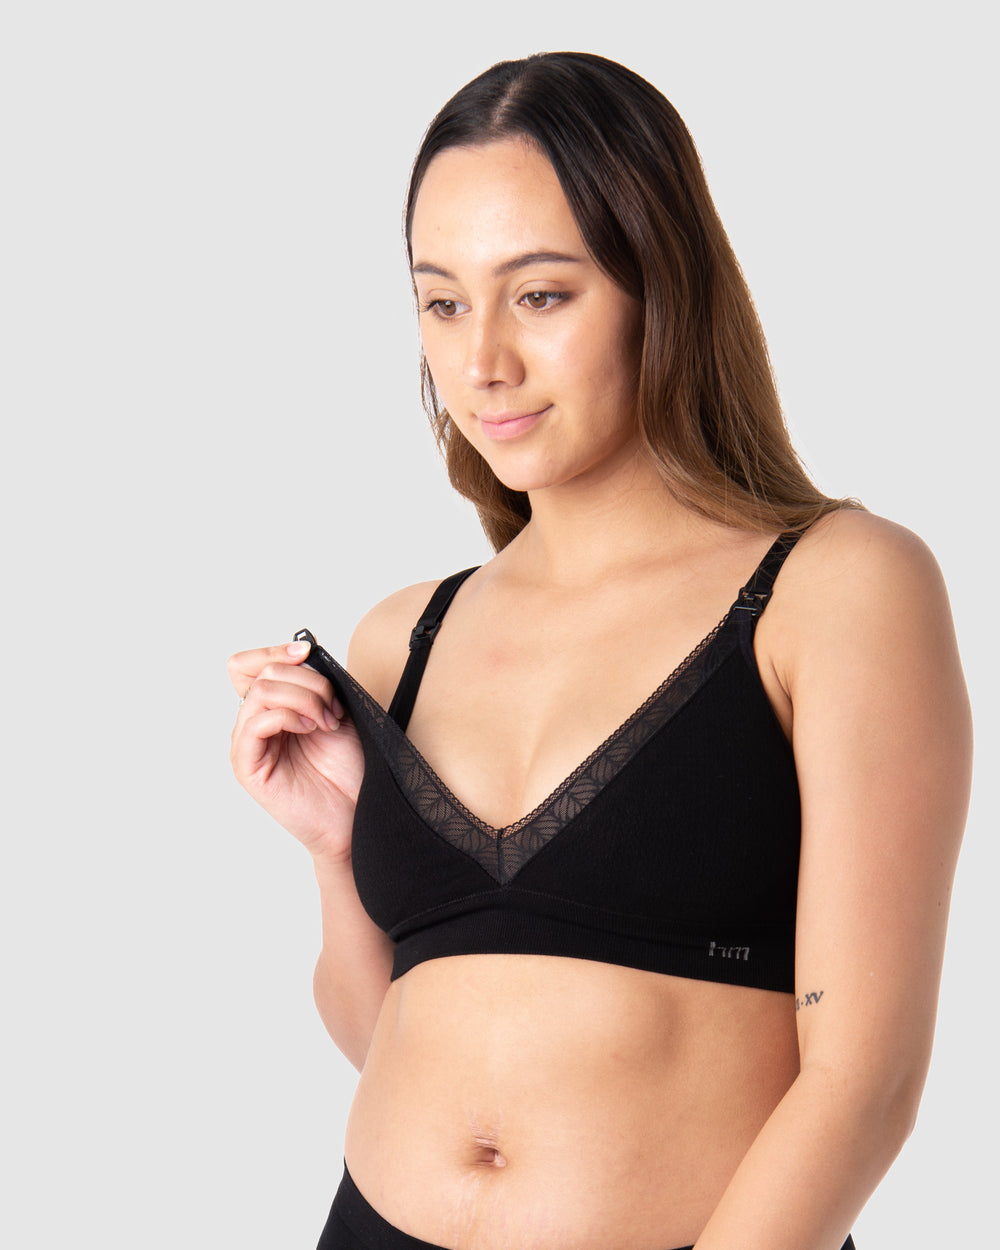 Maternity Nursing Bra Comfortable And Plus Sexy Bras For Breastfeeding And  Infants Soutient Gorge Allaitement Cross Design HKD230812 From Yanqin05,  $4.73